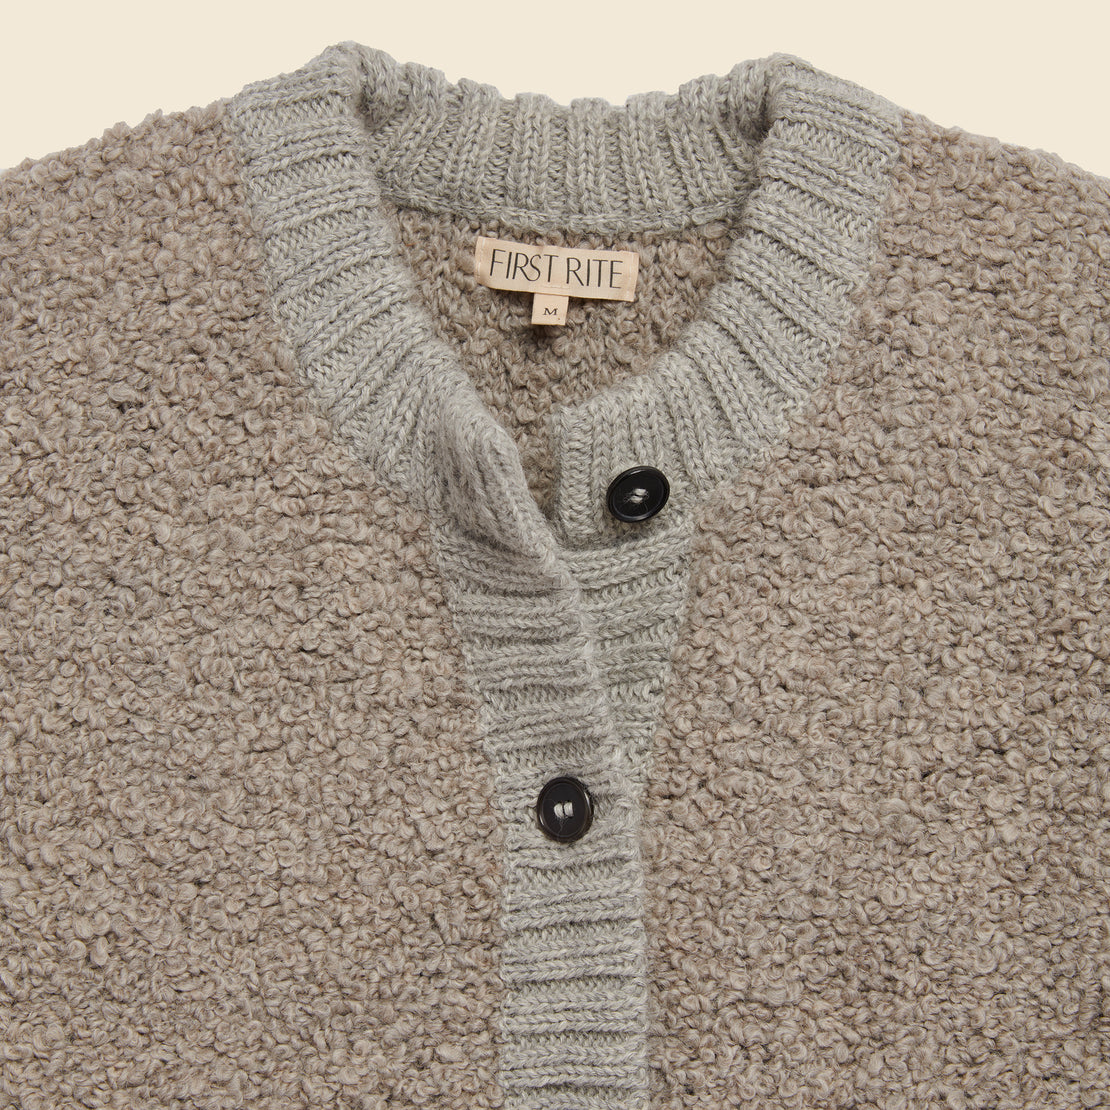 Bulky Button Cardigan - Ash - First Rite - STAG Provisions - W - Tops - Sweater